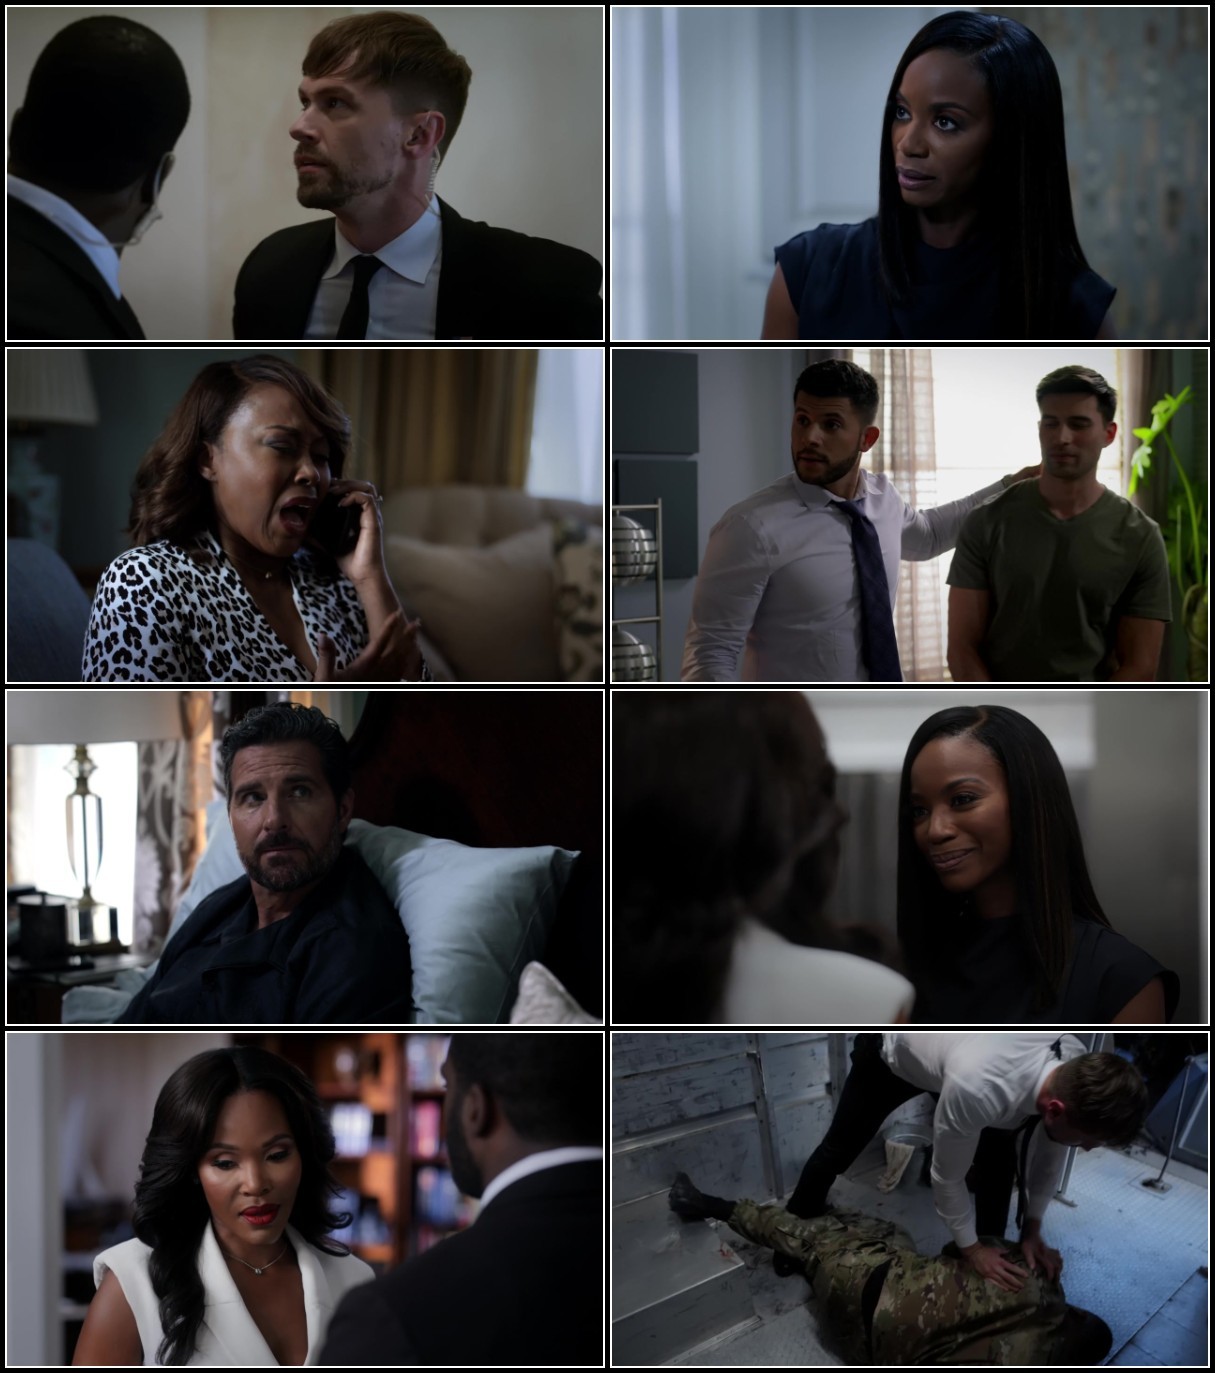 Tyler Perrys The Oval S05E09 720p WEB h264-BAE